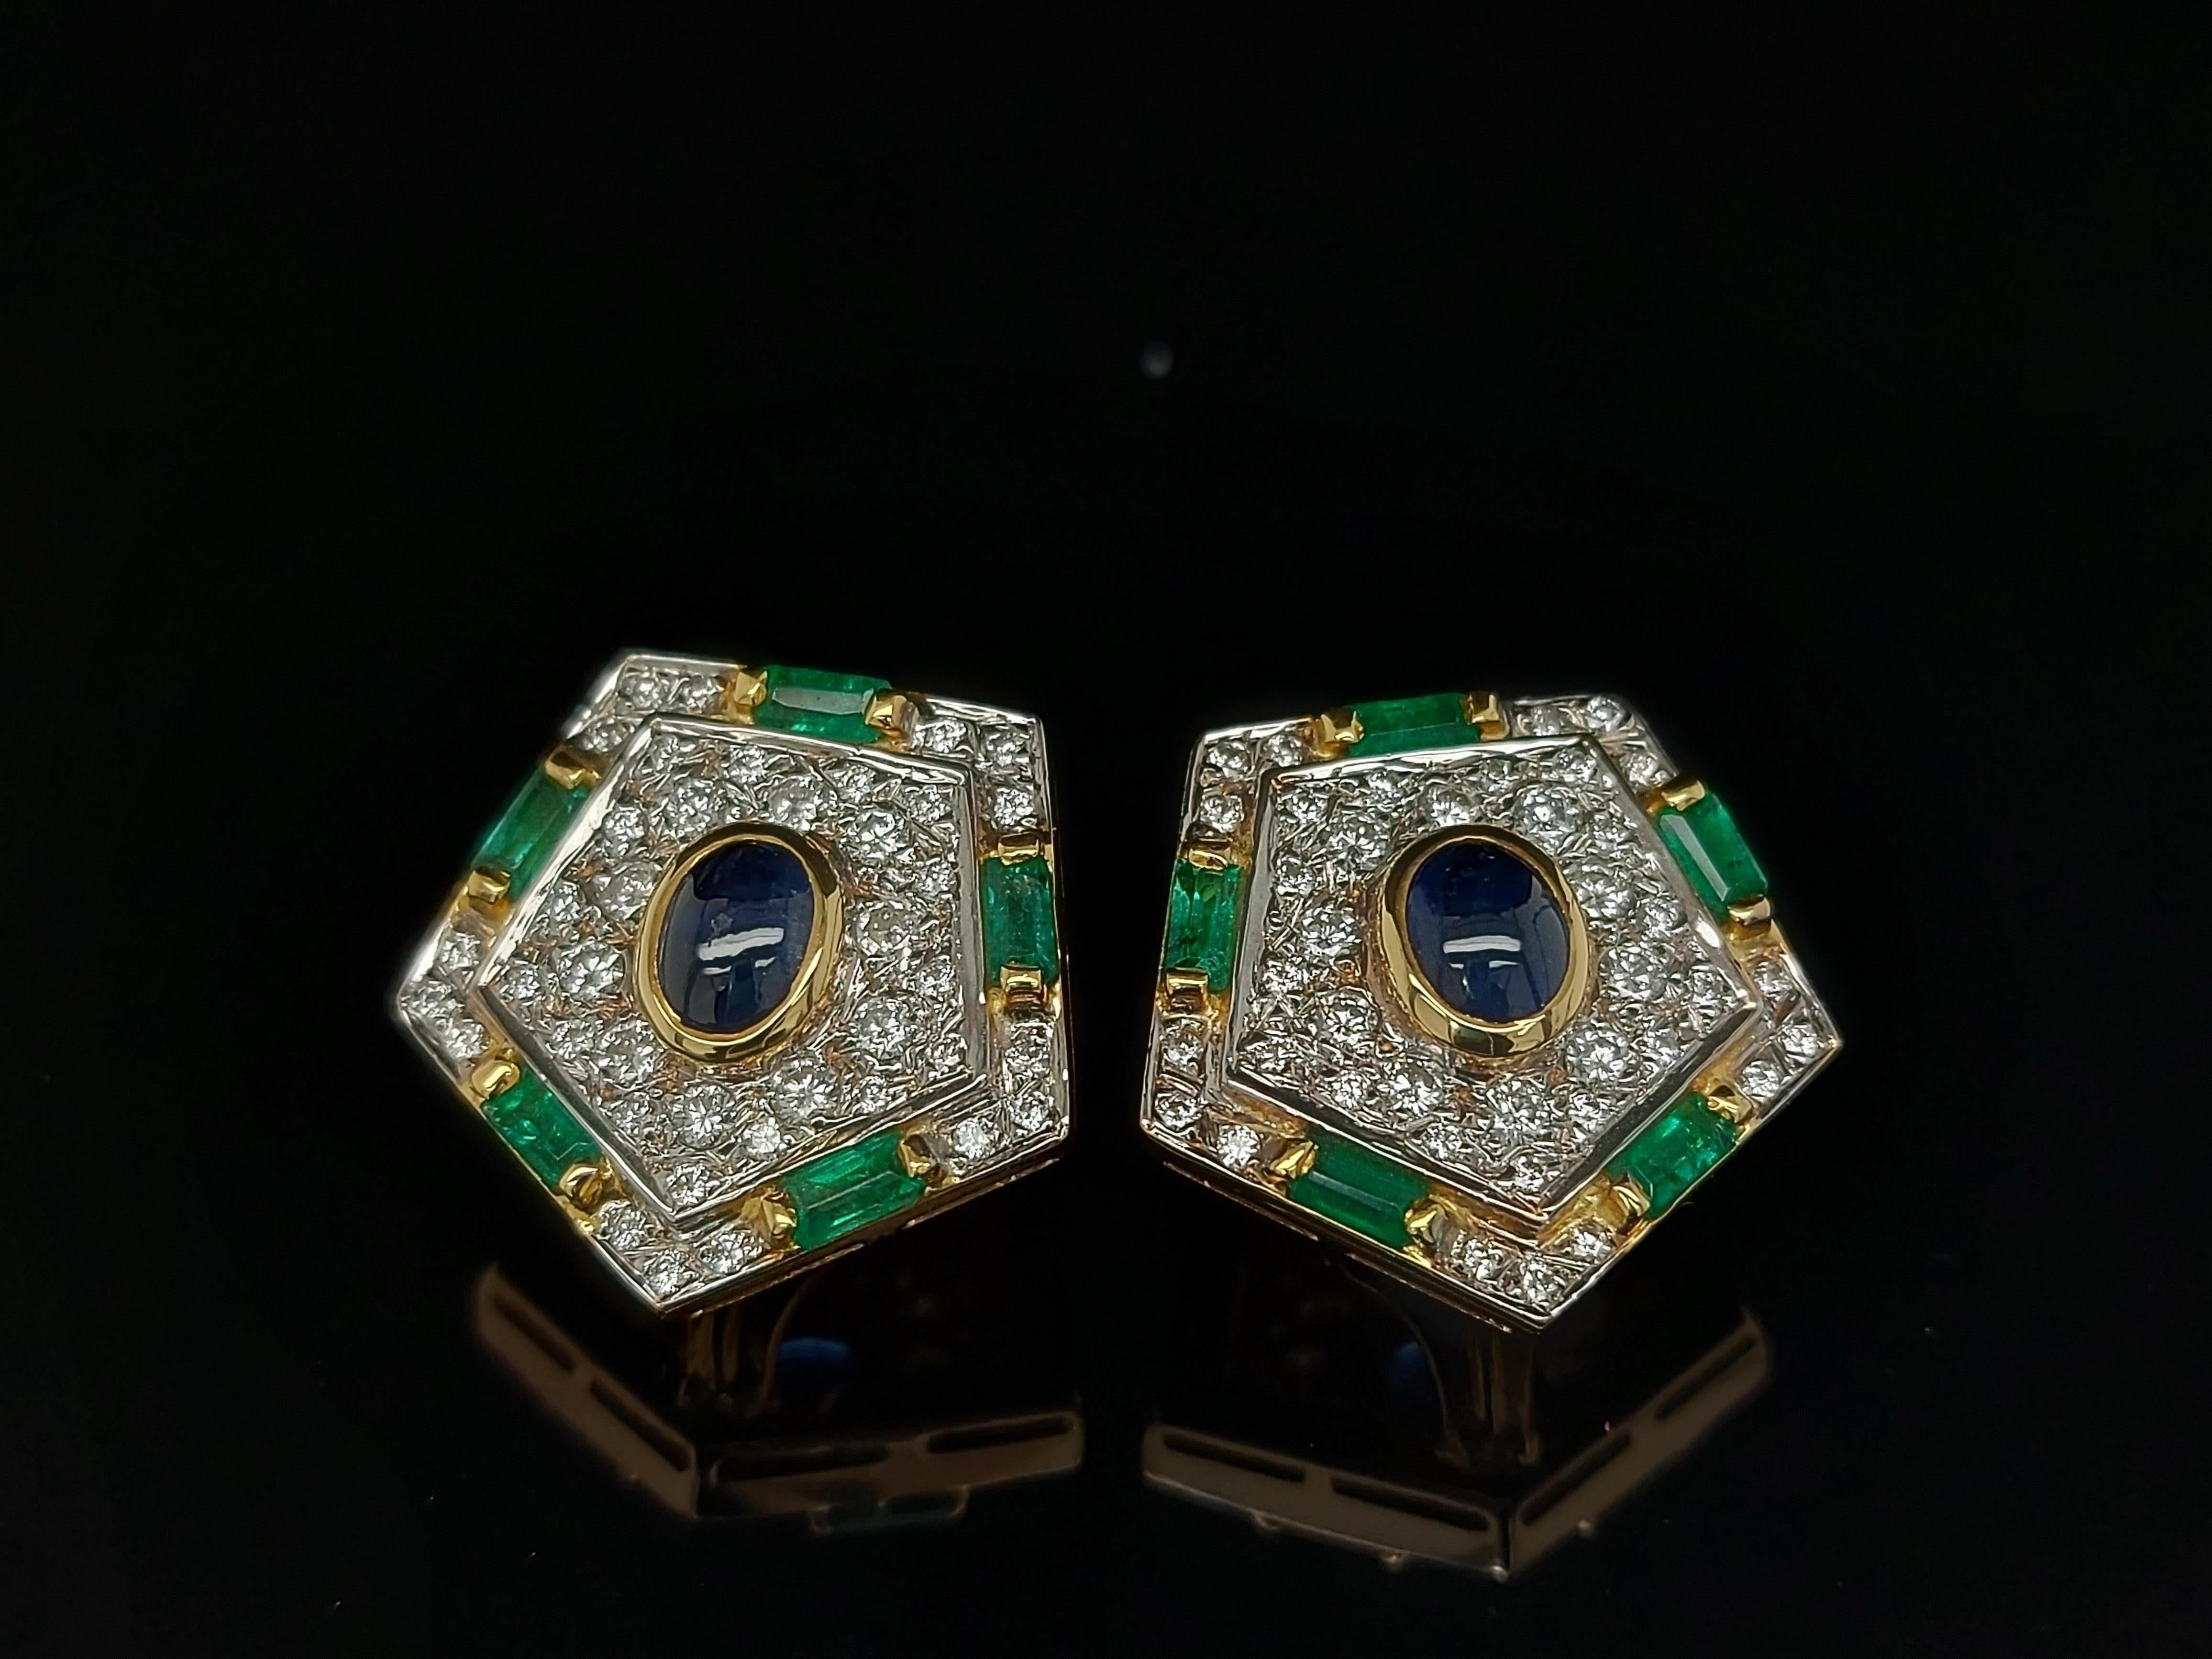 Women's Luxurious Gold Clip-On Earrings With Diamonds, Emerald and Cabochon Sapphire For Sale